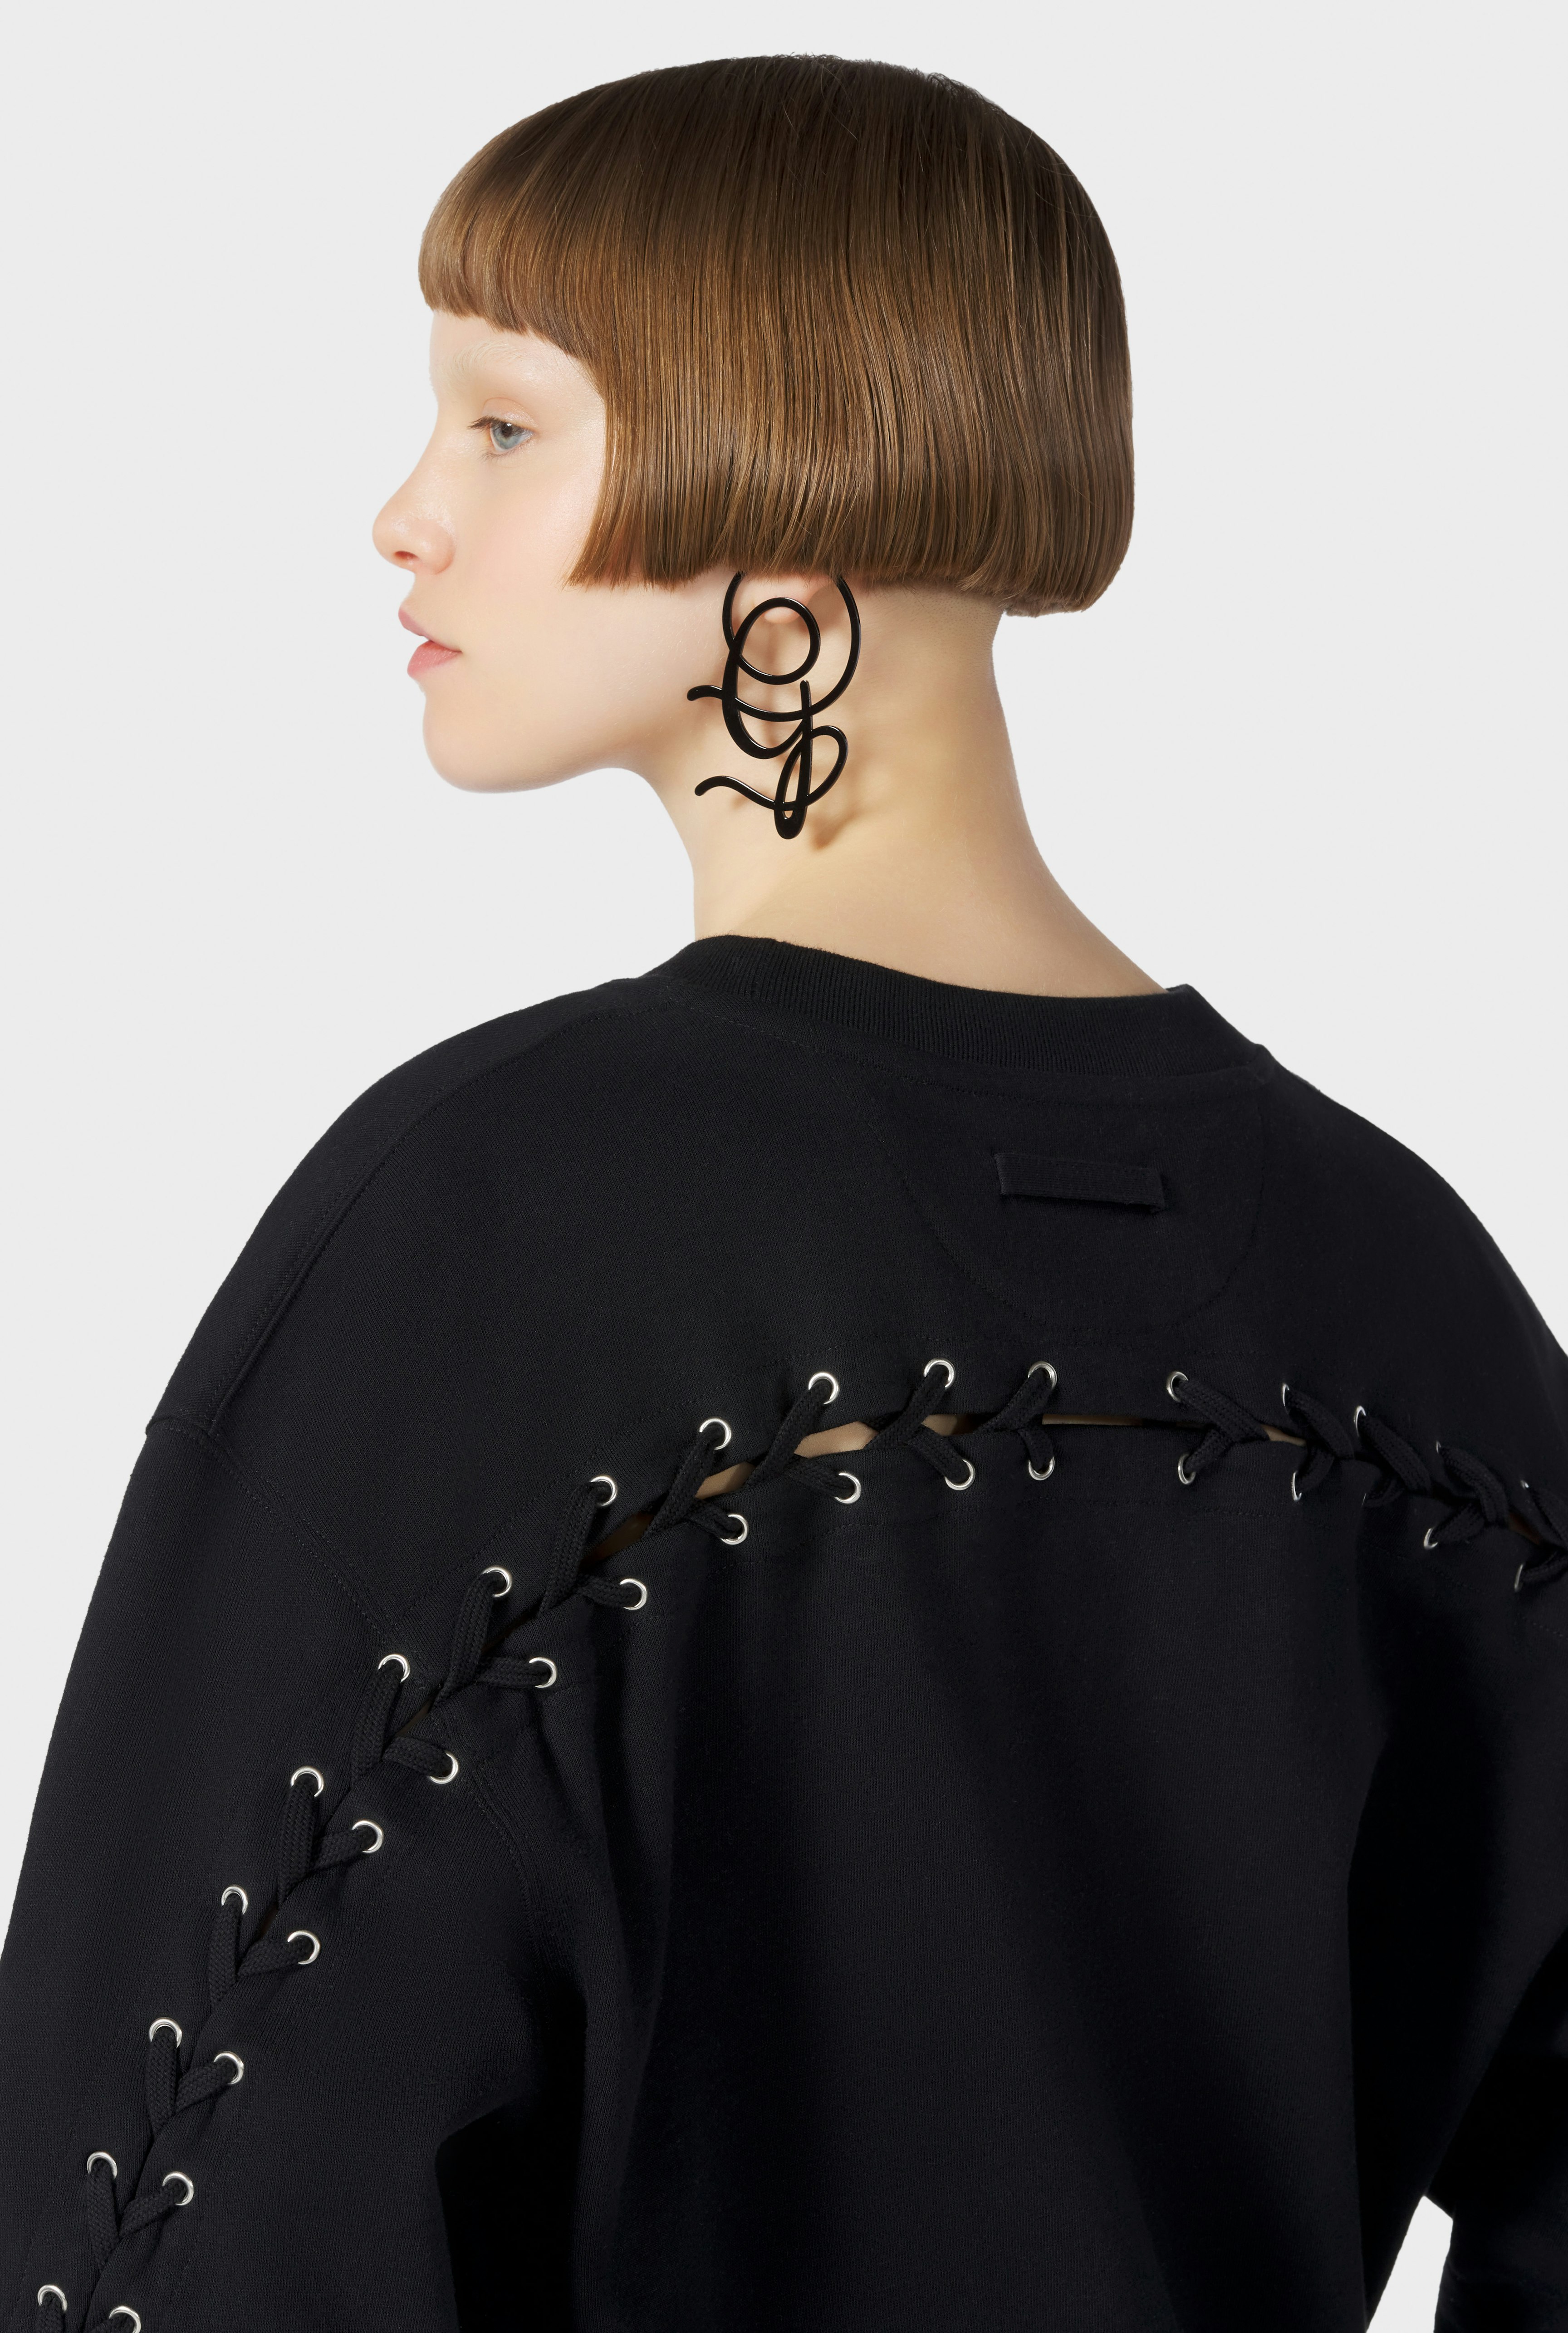 The Black Lace-Up JPG Sweatshirt hover